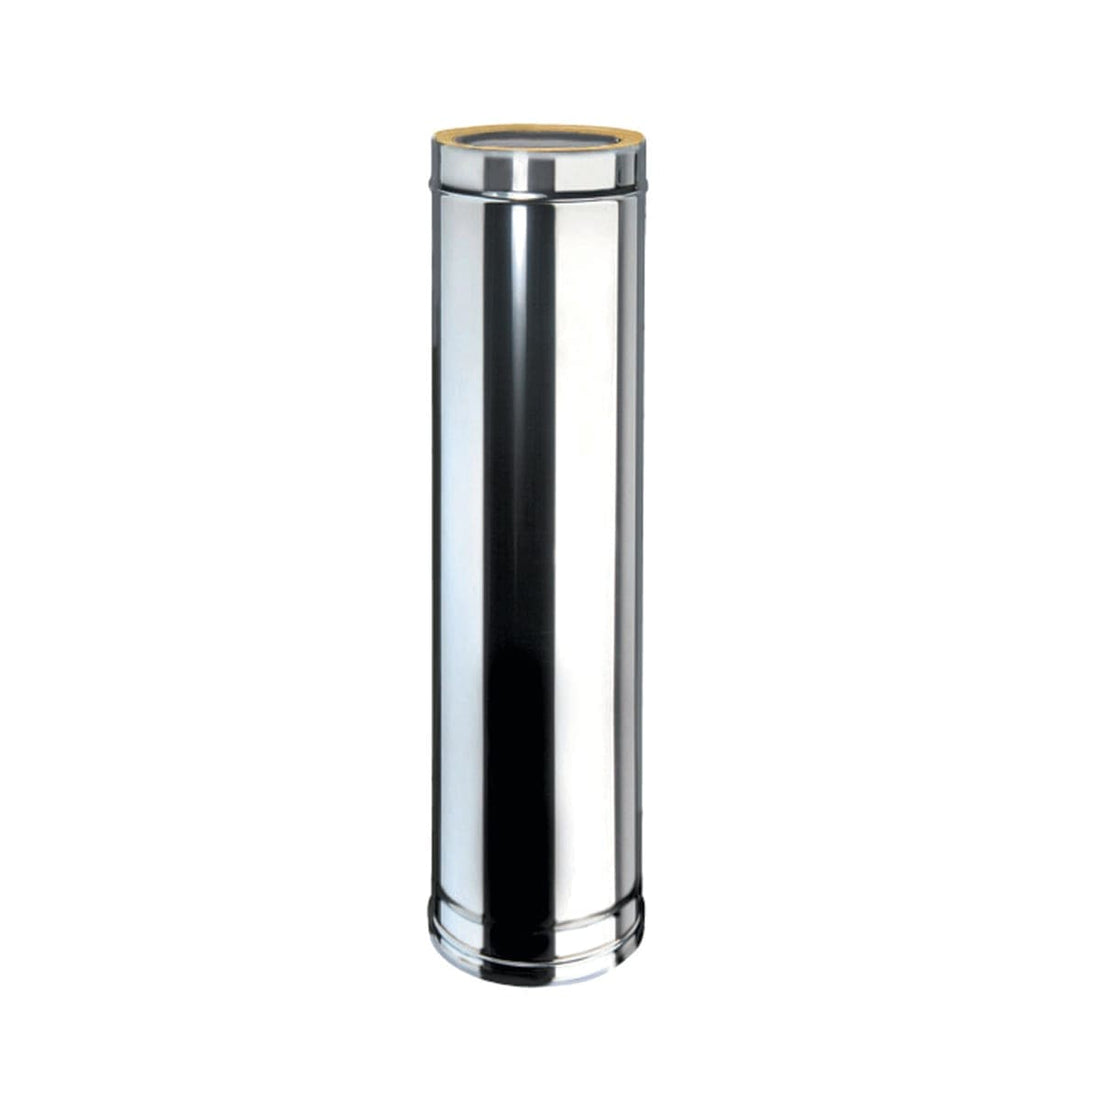 STAINLESS STEEL PIPE DP COIB AISI316L D100/150X1000 - best price from Maltashopper.com BR430006339